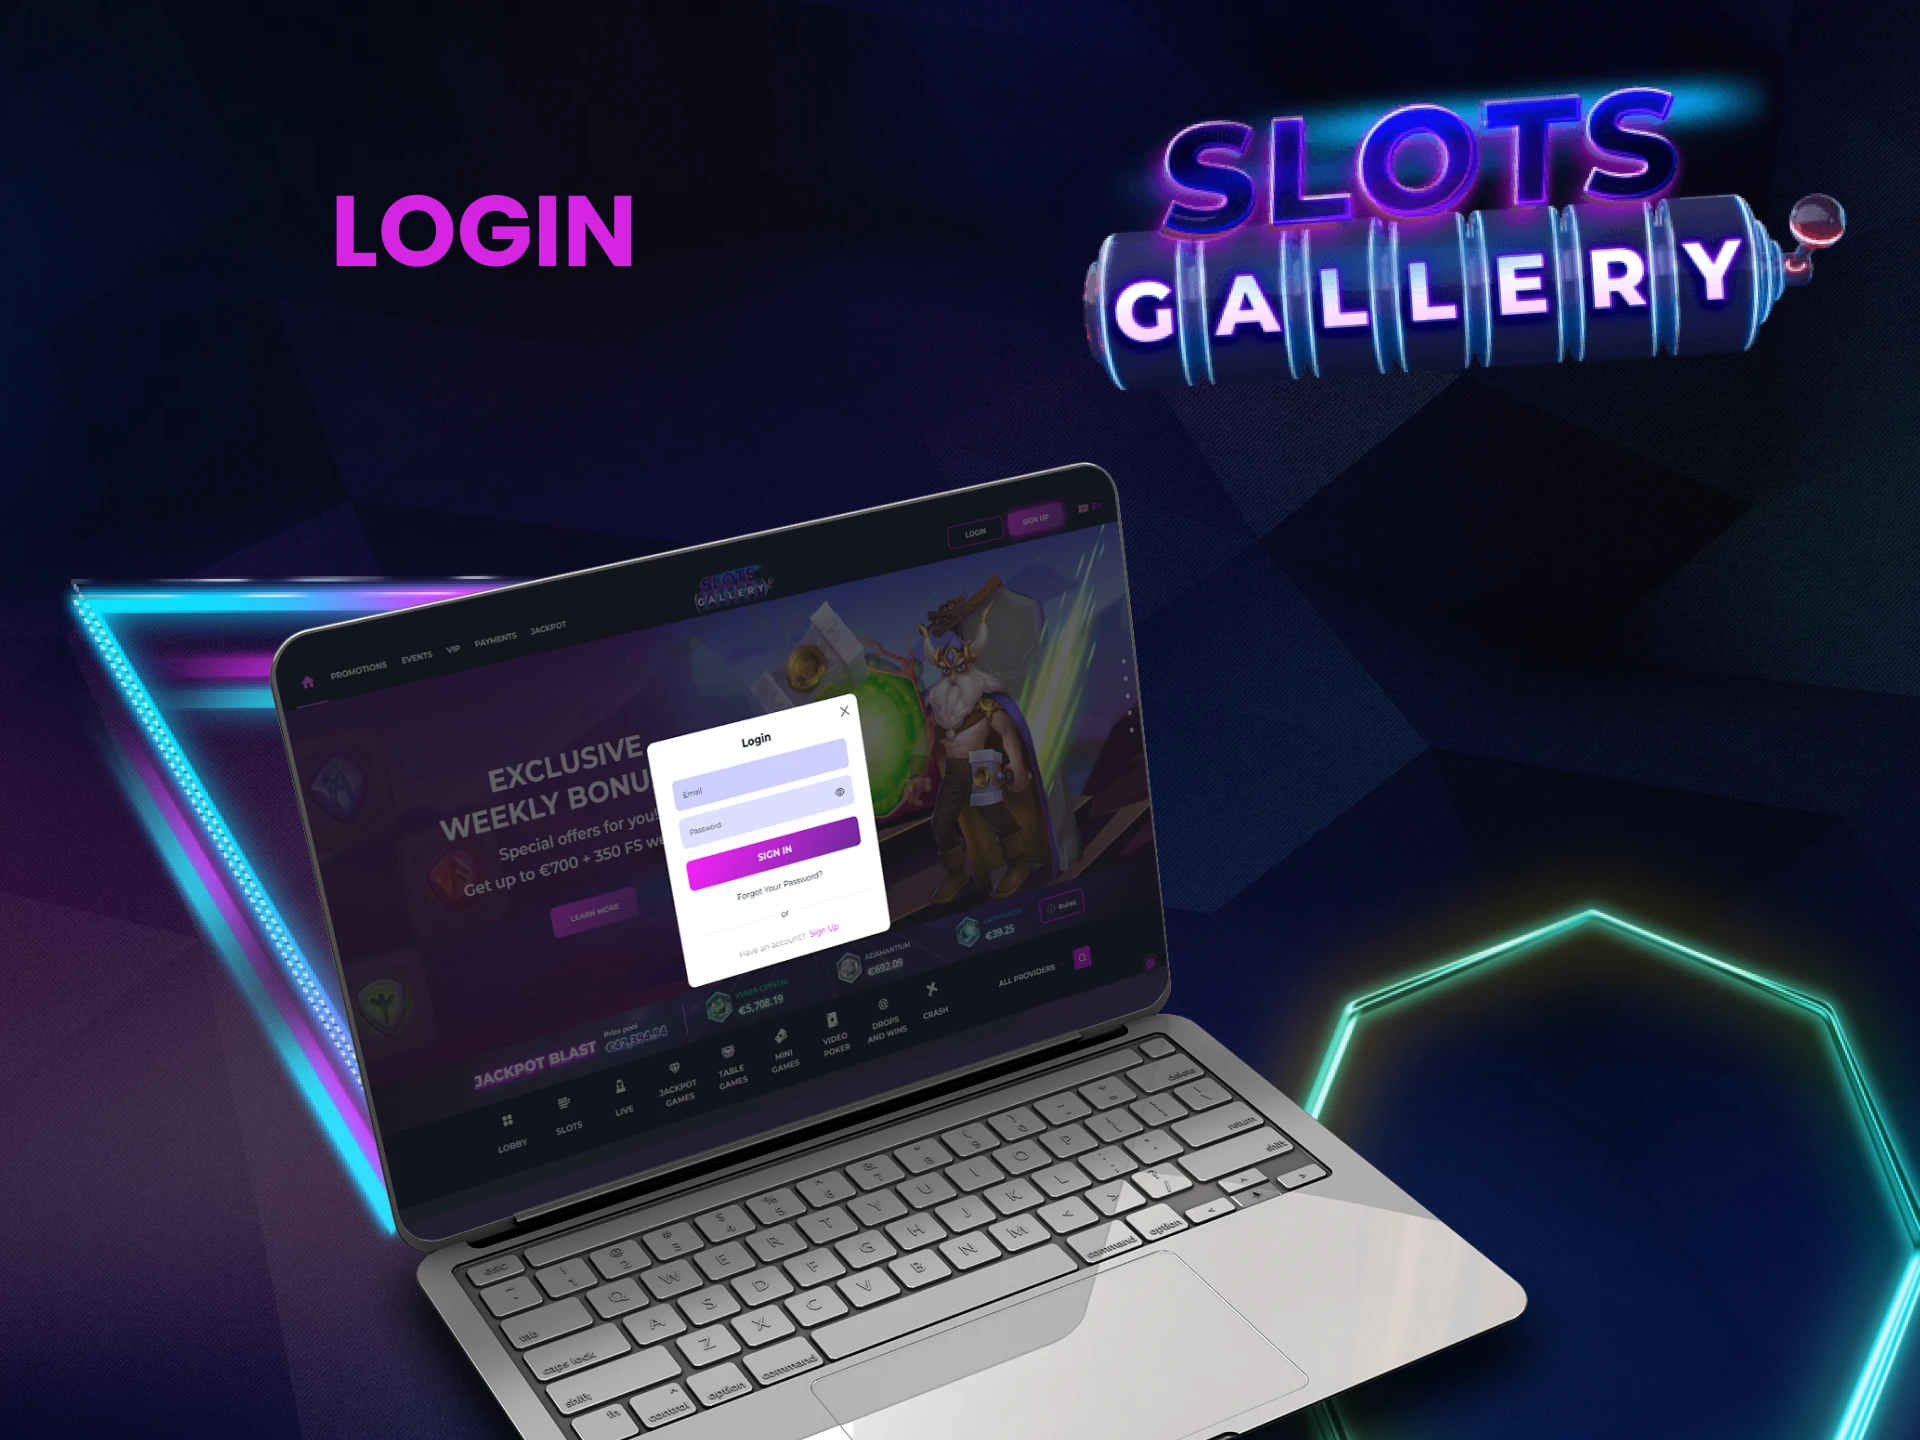 Log in to your personal account on Slots Gallery.